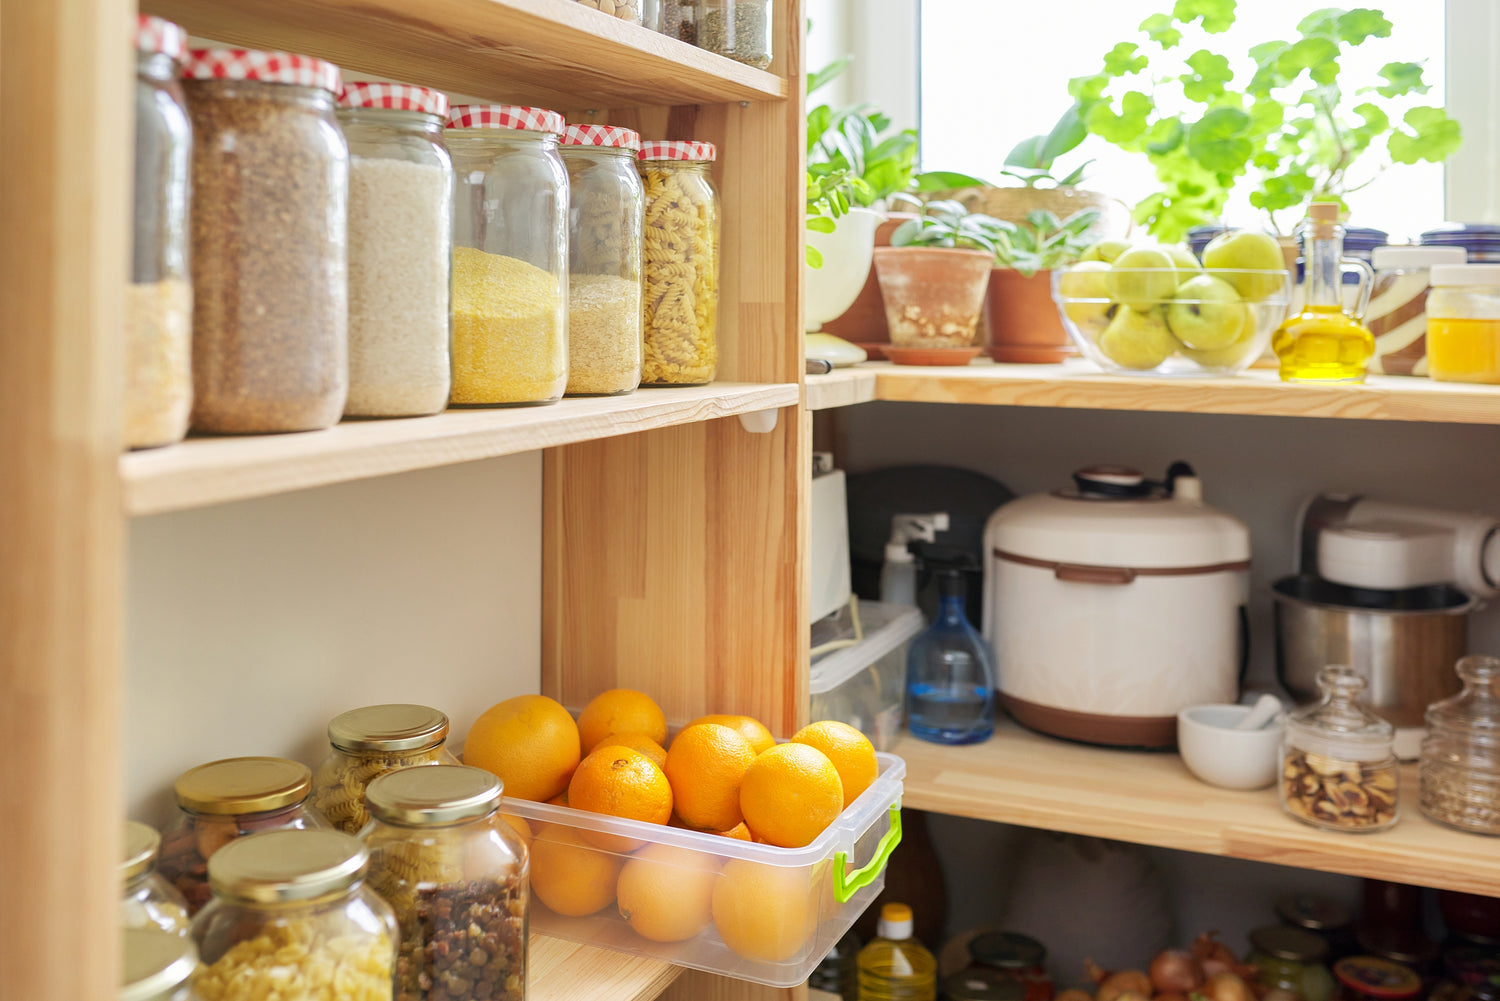 How To Organize Pantry, Spices & Food Storage Areas